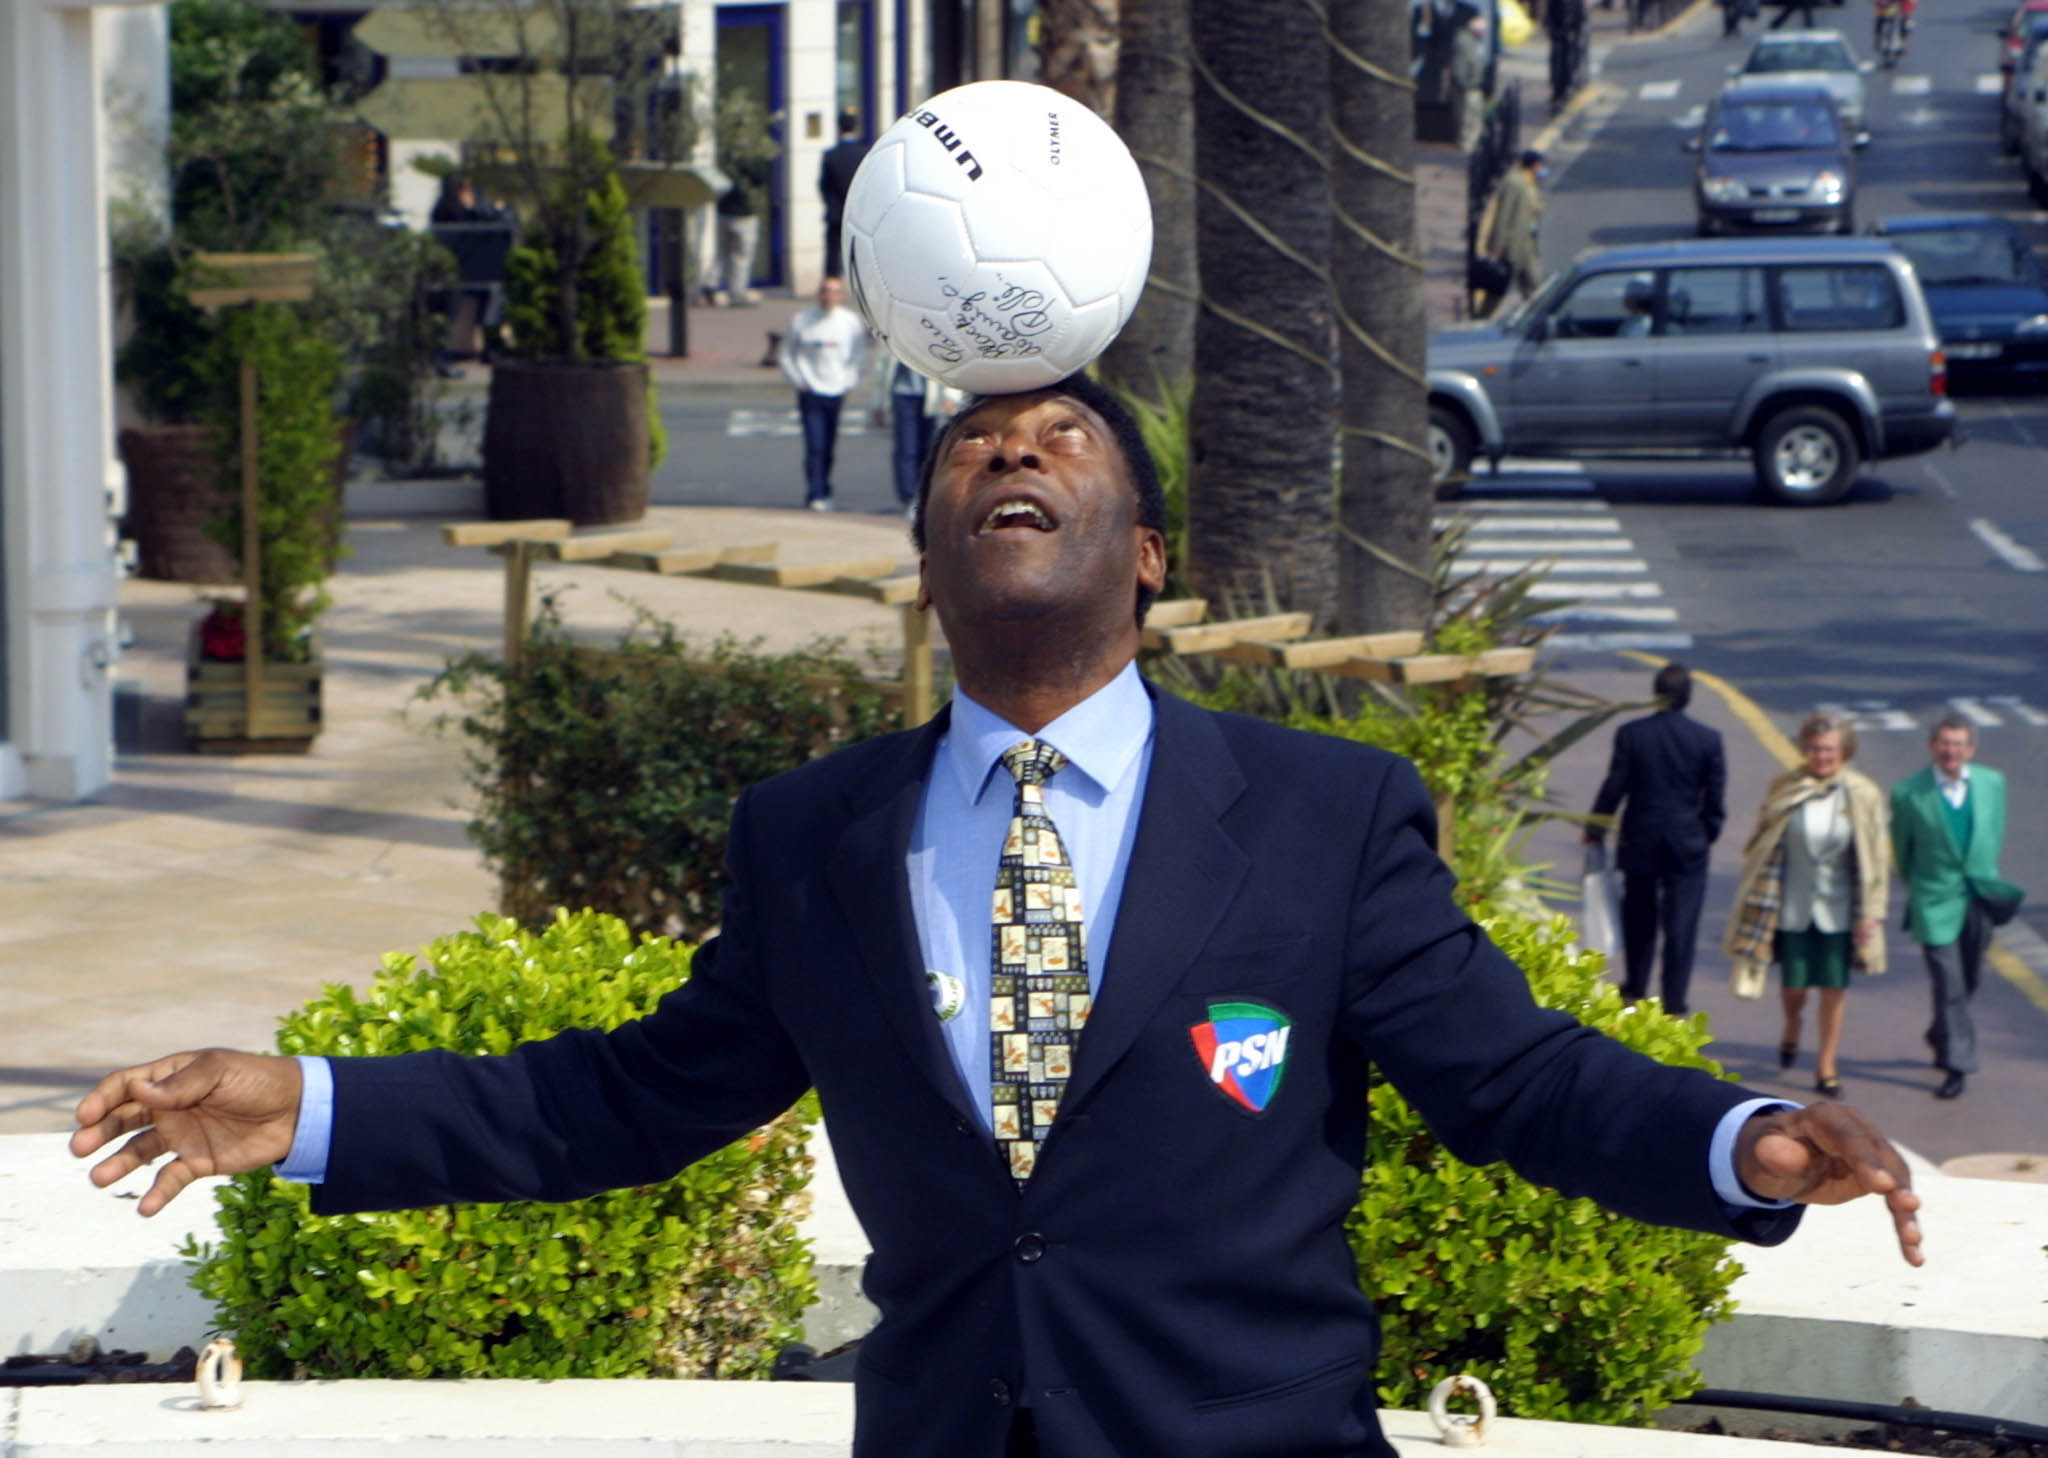 PHOTO: In this April 4, 2001, file photo, Brazilian football legend Pele plays with a soccer ball in Cannes, France.